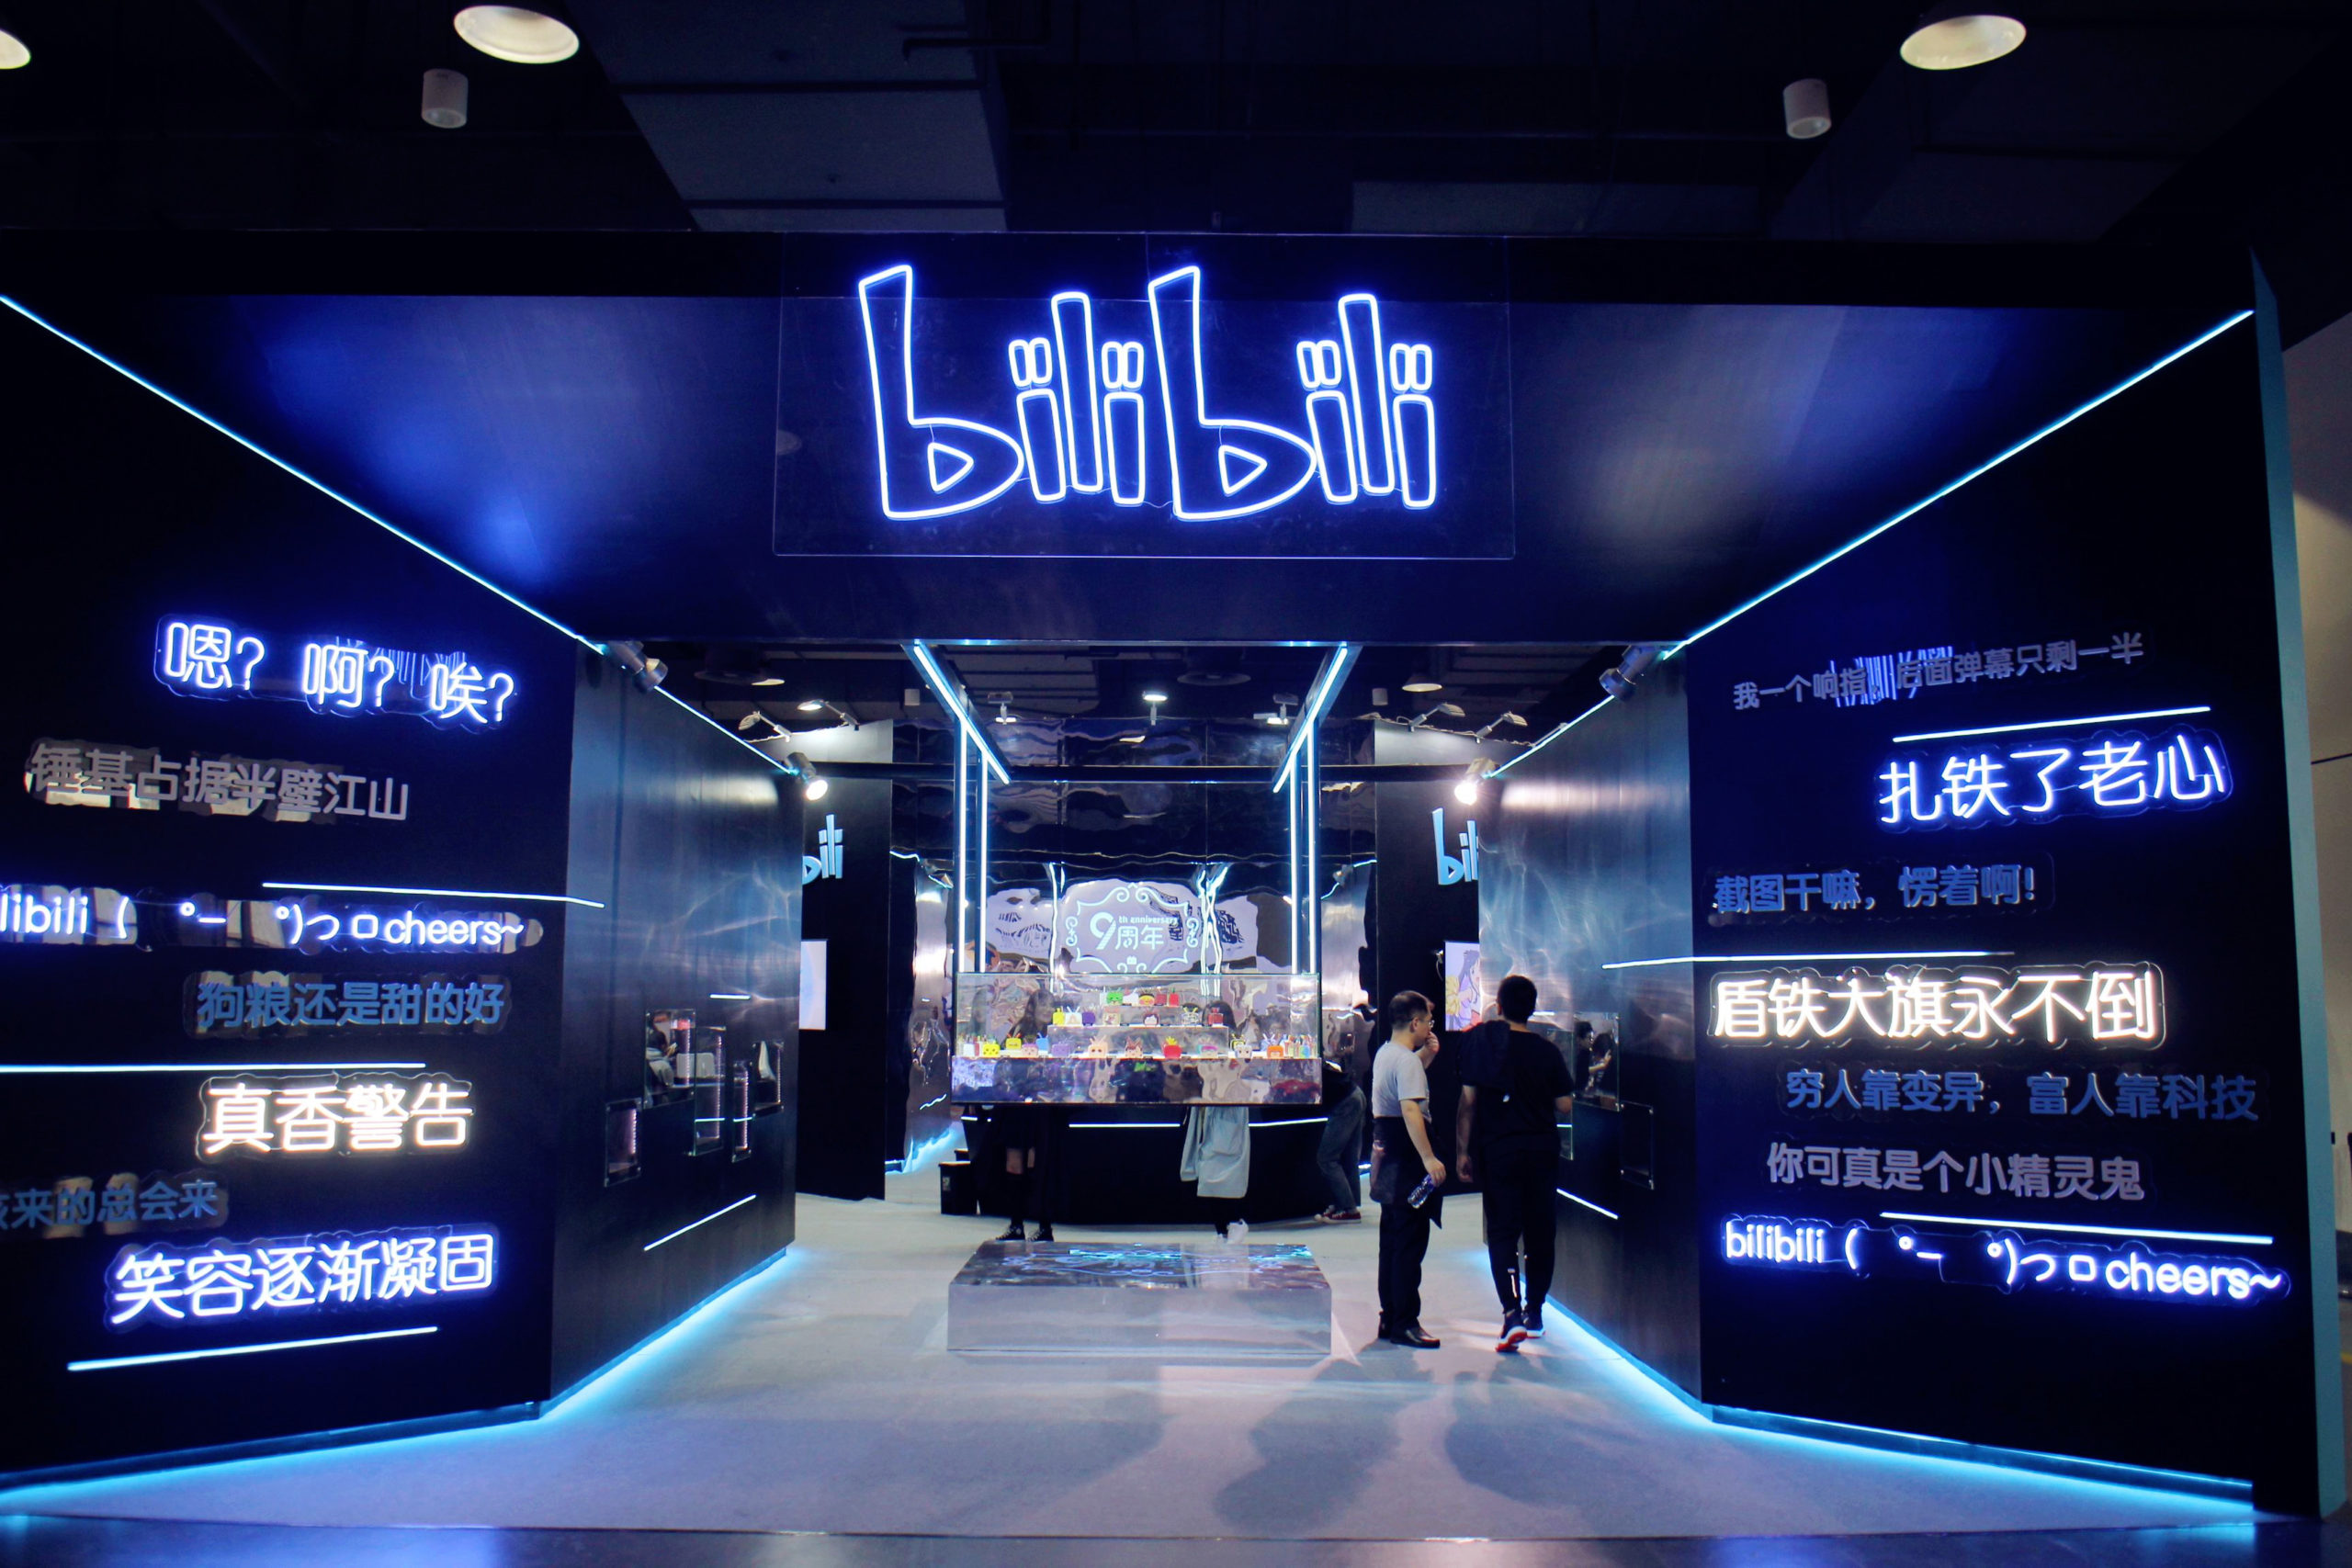 BILIBILI INVESTS HK$960M IN X.D. NETWORK, WHICH RUNS CHINESE GAME DISTRIBUTION PLATFORM TAPTAP; MOBILE GAMES ACCOUNTED FOR 40% OF BILIBILI’S 2020 REVENUES (RITA LIAO/TECHCRUNCH)